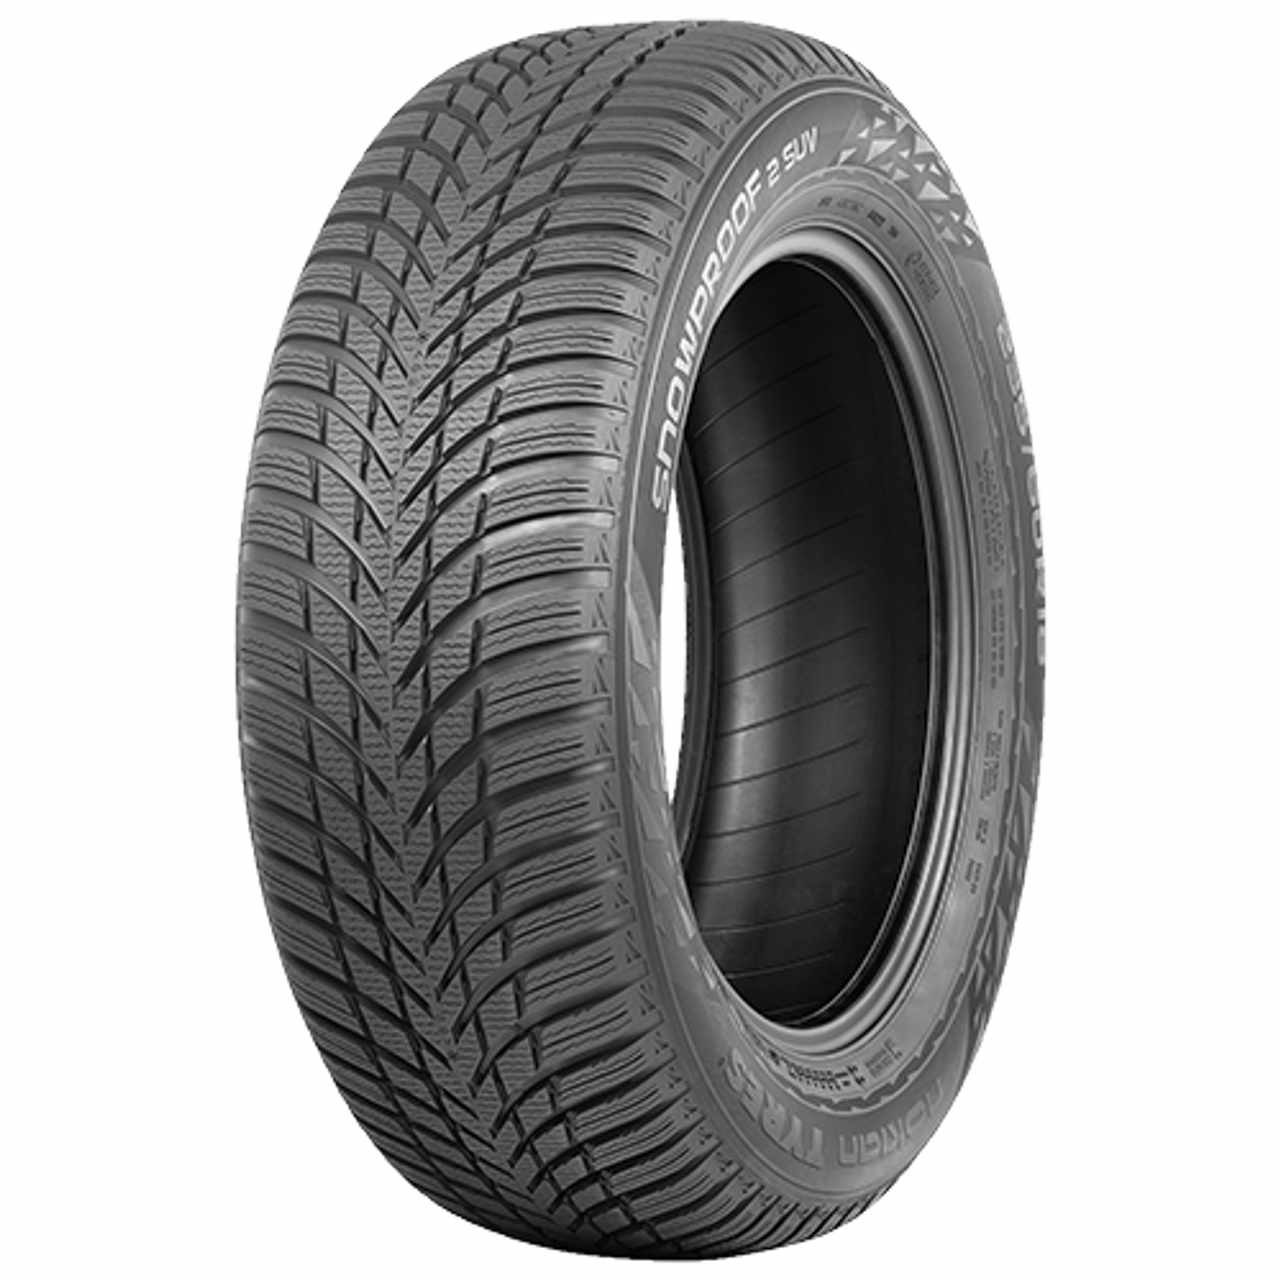 NOKIAN SNOWPROOF 2 SUV 225/60R17 99H BSW